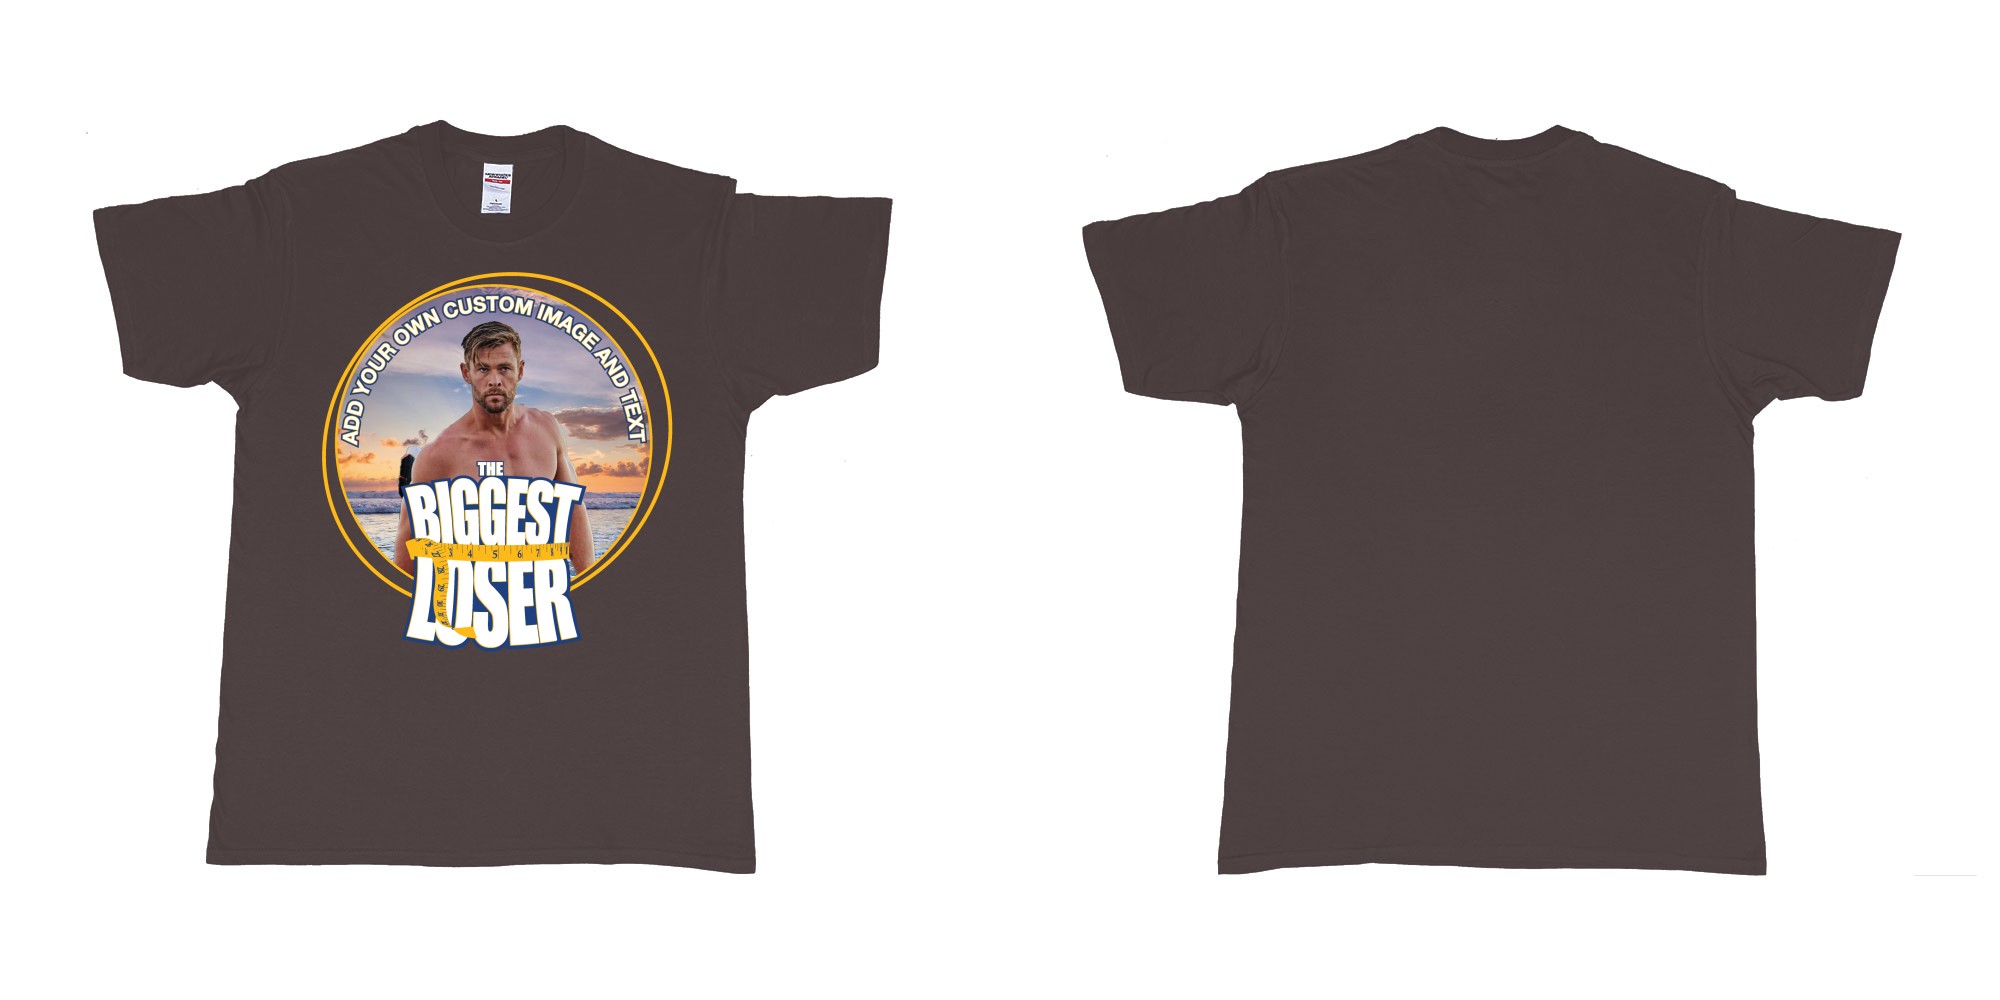 Custom tshirt design the biggest loser logo custom image funny tshirt design in fabric color dark-chocolate choice your own text made in Bali by The Pirate Way